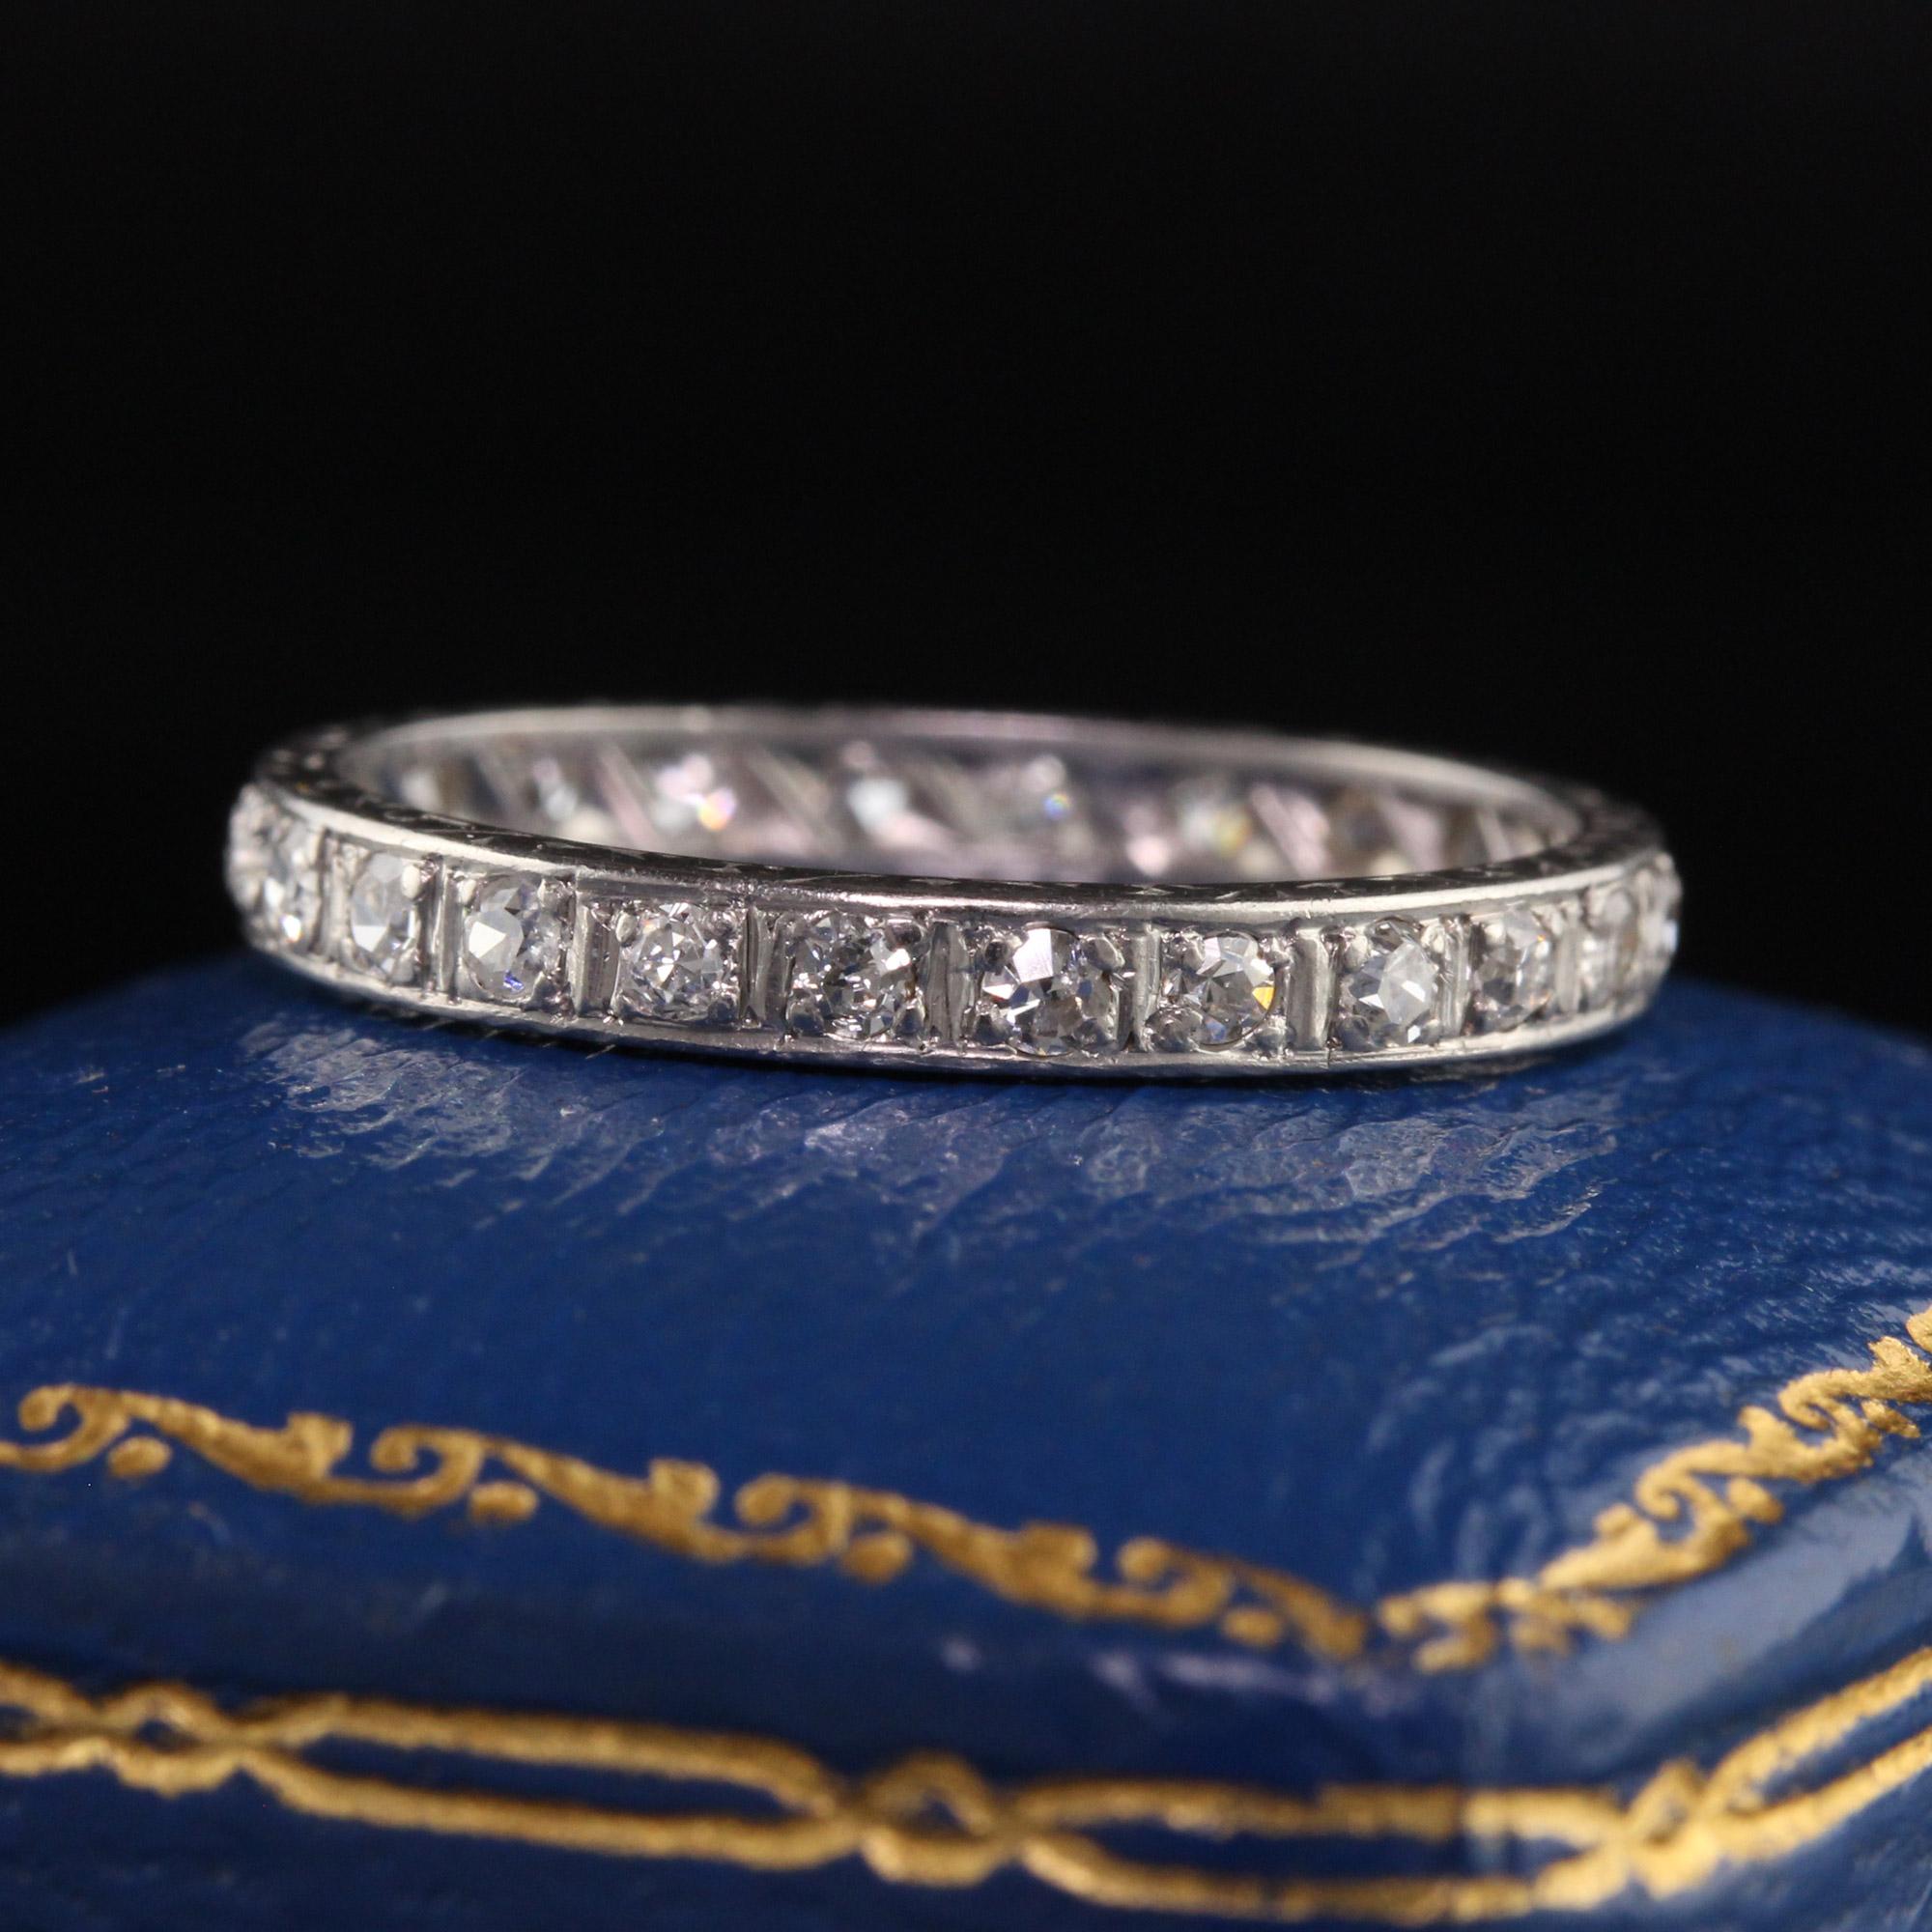 Beautiful Antique Art Deco Platinum Old Cut Diamond Engraved Eternity Band. This gorgeous wedding band is crafted in platinum. It has old cut diamonds going around the entire ring and the sides are engraved.

Item #R1252

Metal: Platinum

Weight: